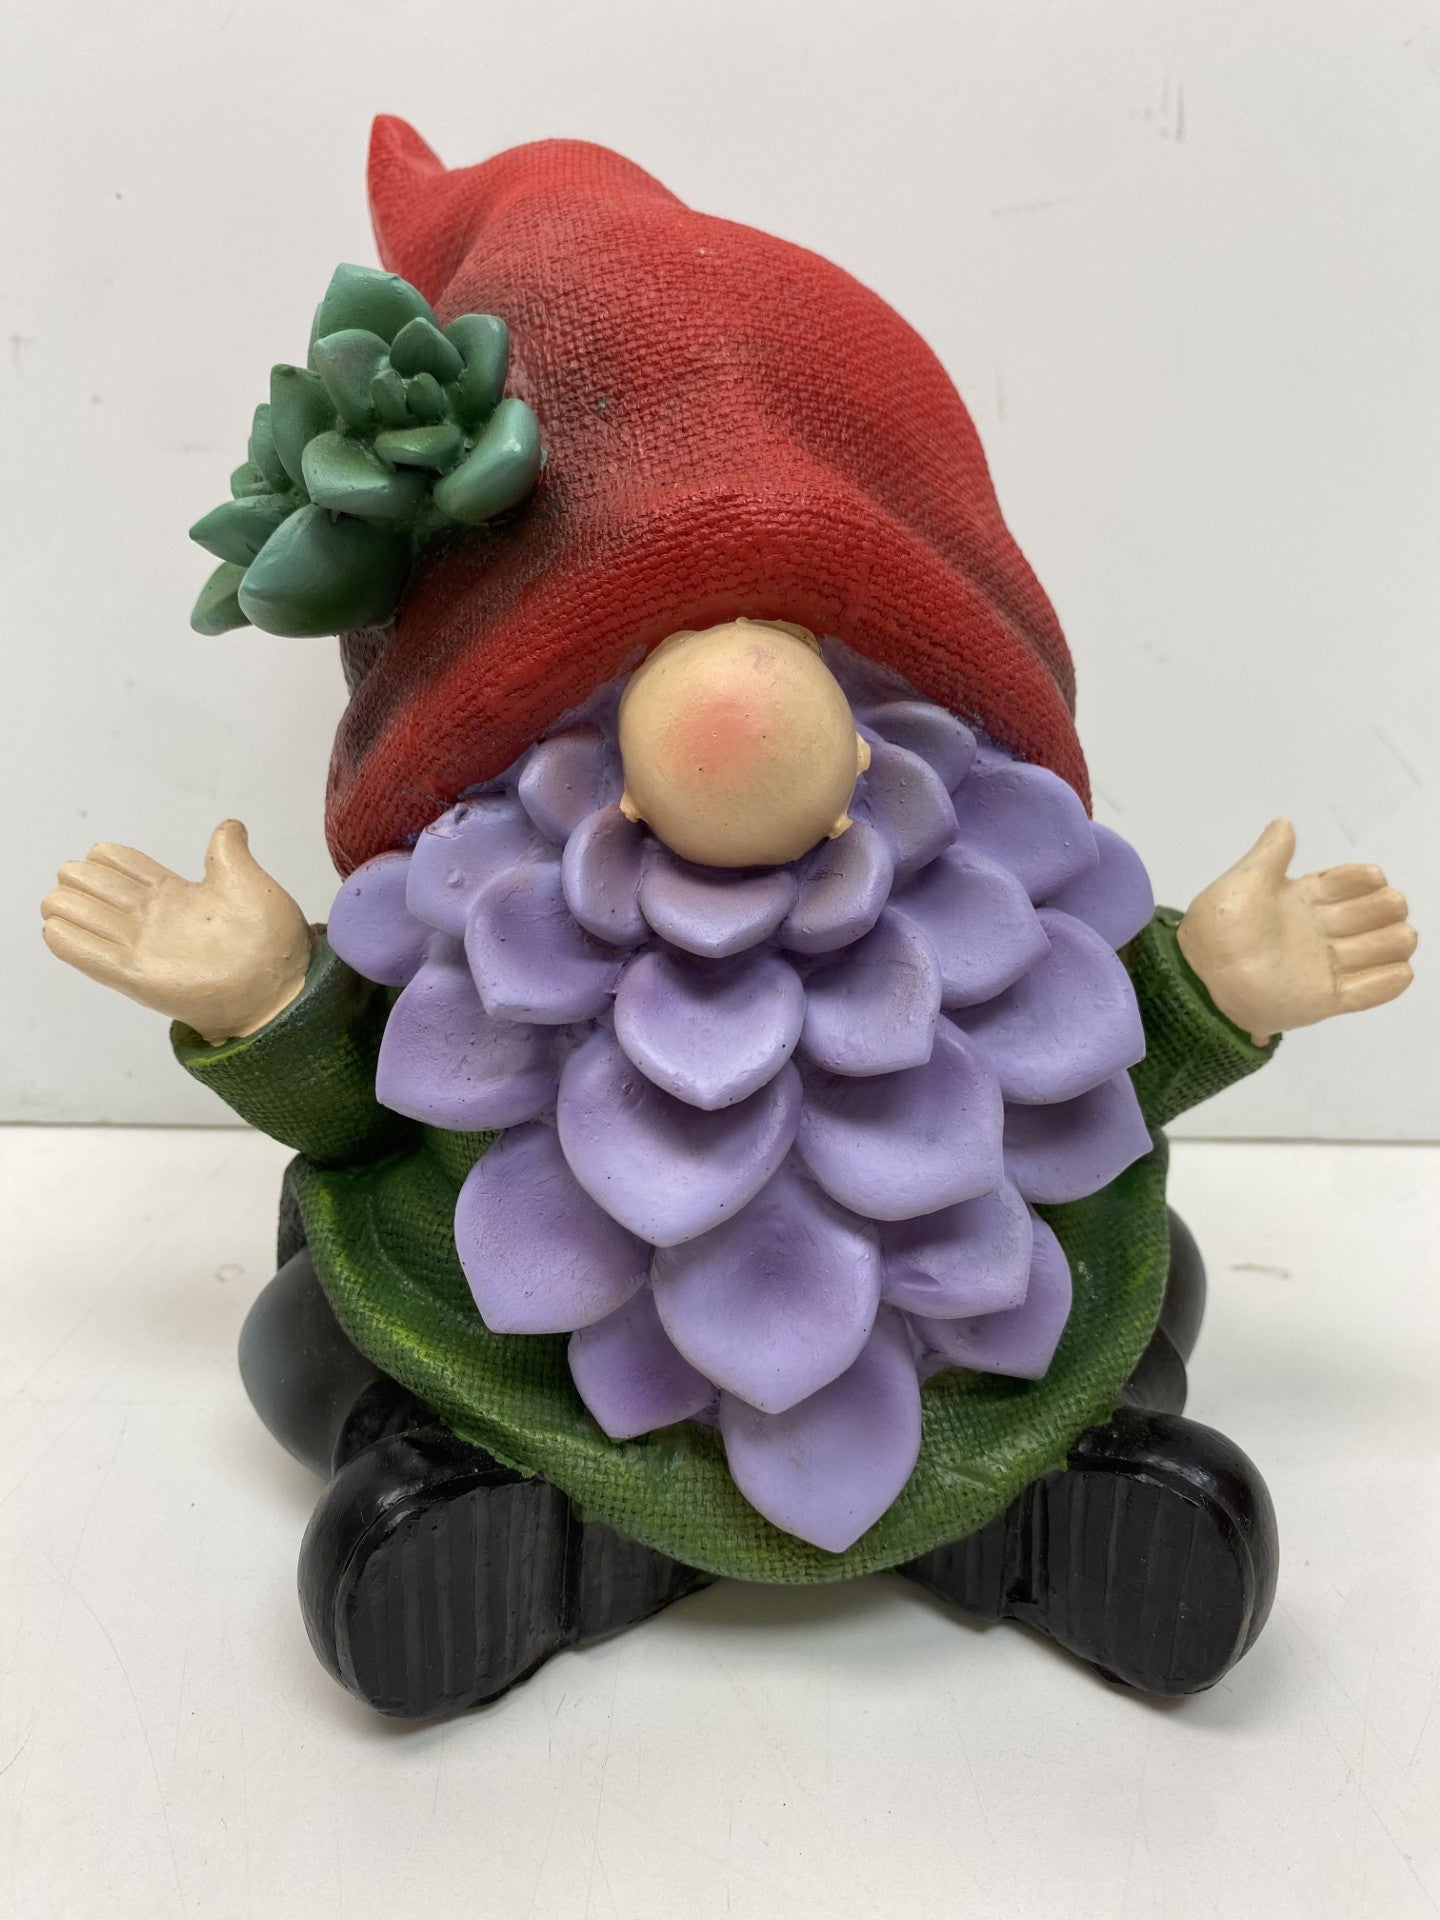 Garden Gnome Succulent Accents with Red Hat